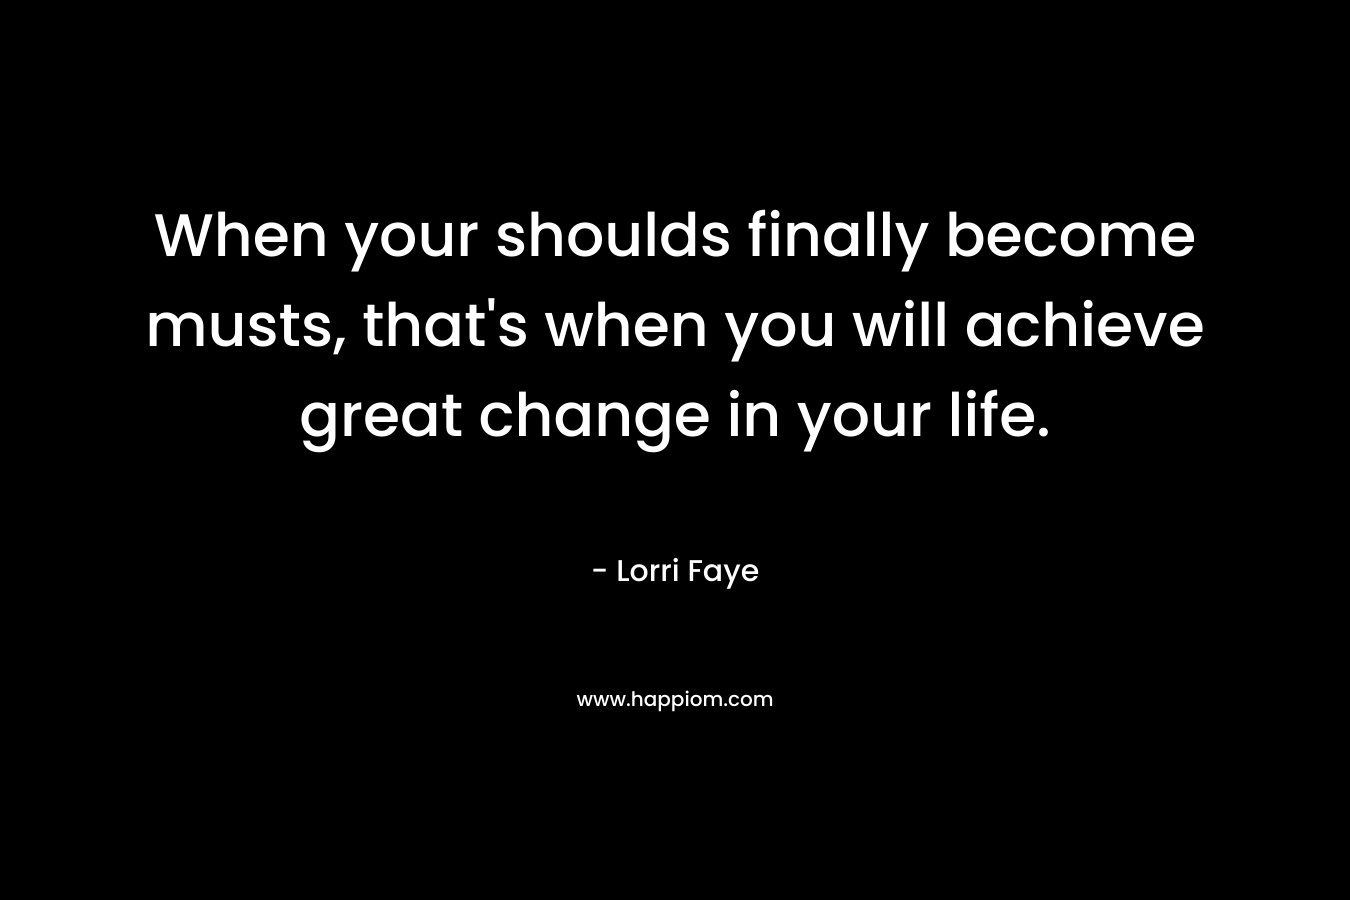 When your shoulds finally become musts, that’s when you will achieve great change in your life. – Lorri Faye